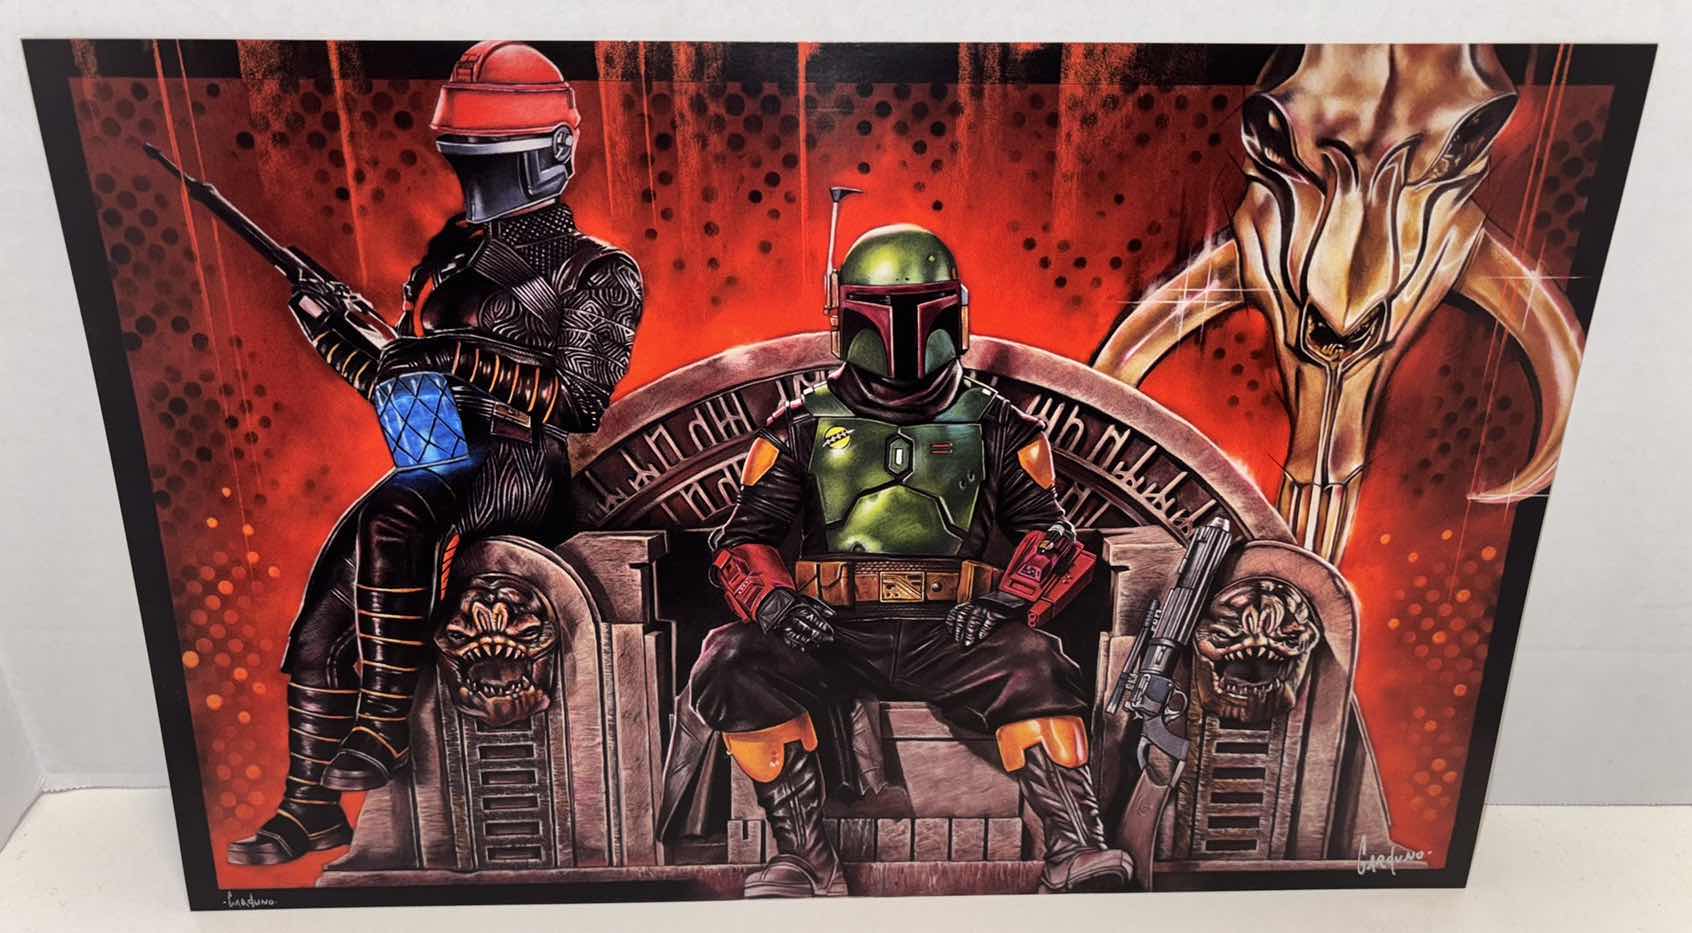 Photo 1 of VICTOR GARDUNO BOBA FETT & FENNEC SHAND 11” X 17” INFINITY GLOSS UNFRAMED PRINT W EMBOSSED SEAL, DIGITAL SIGNATURE & OFFICIAL SIGNATURE W COA INCLUDED, STORED IN A RIGID PRINT PROTECTOR SLEEVE